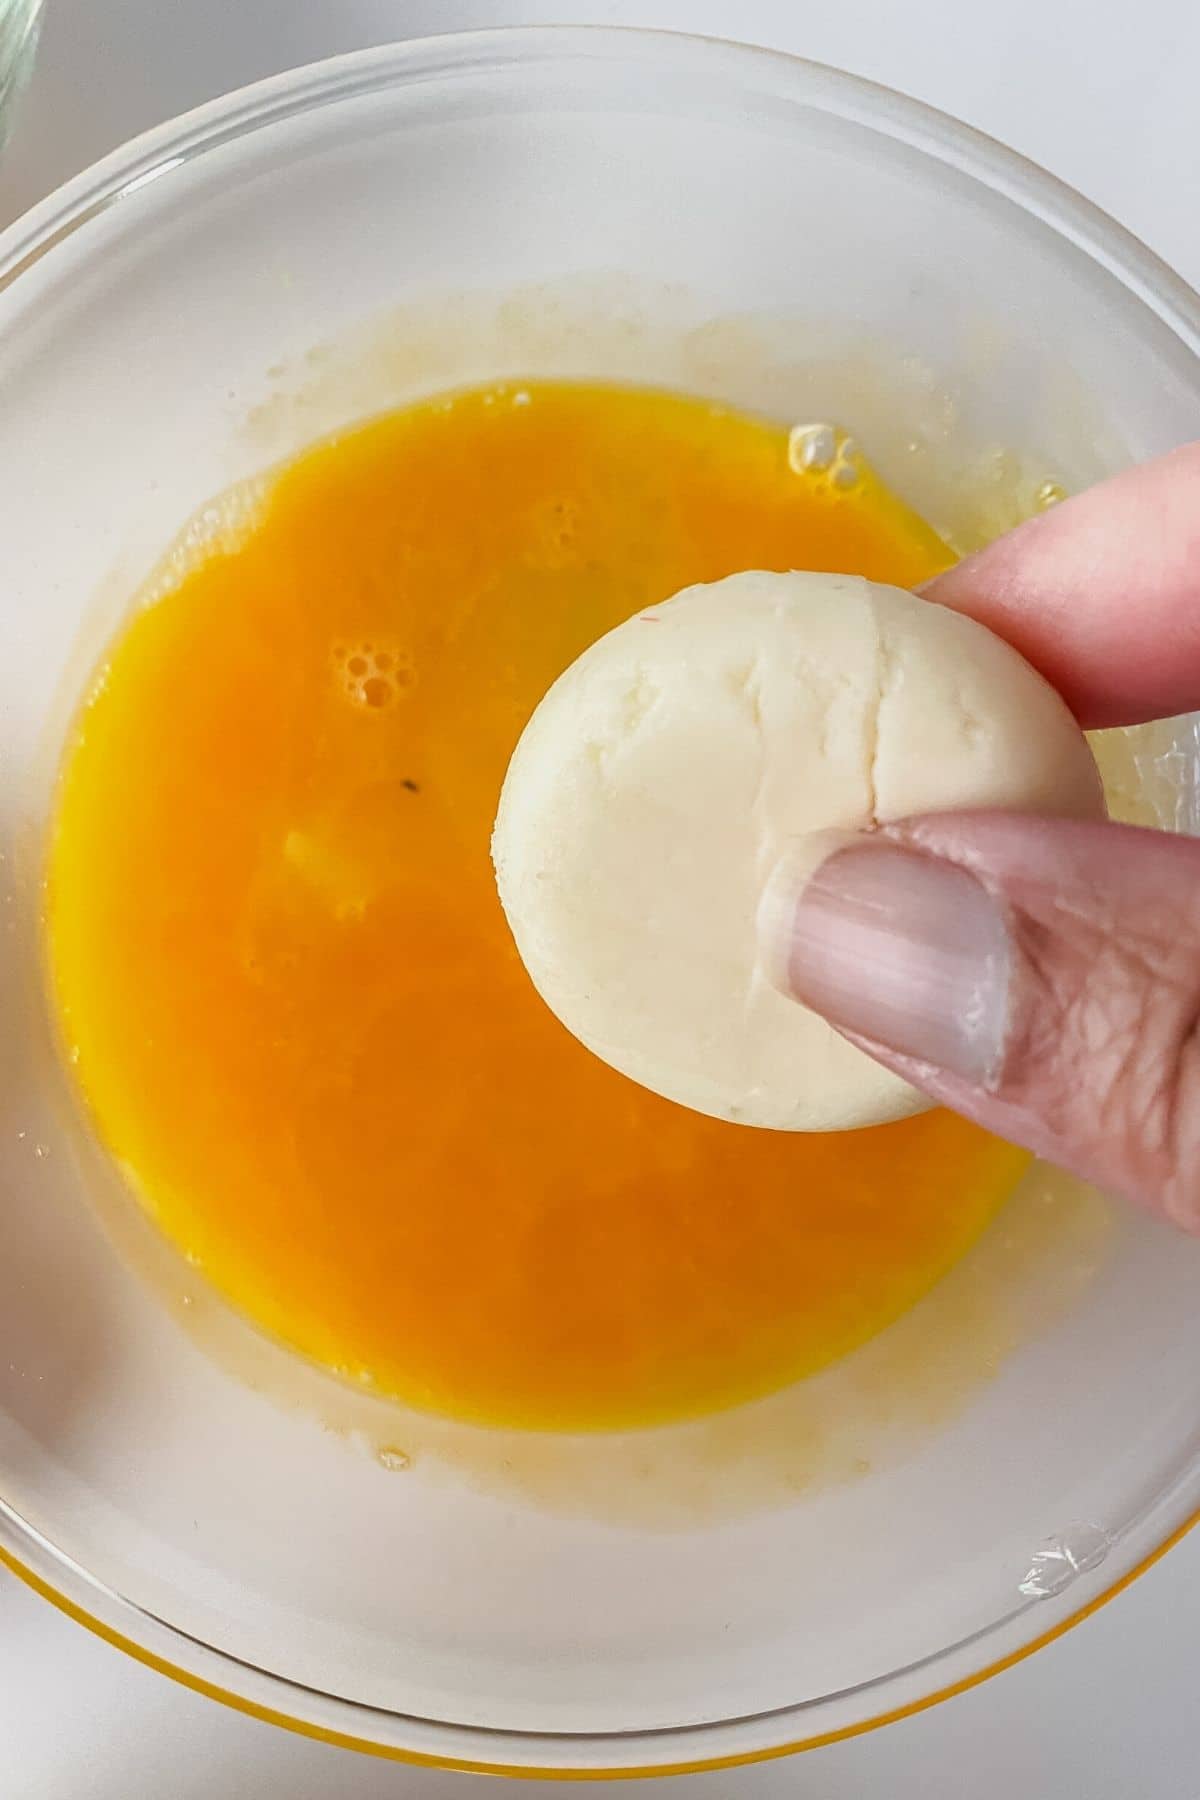 Dipping cheese round into egg